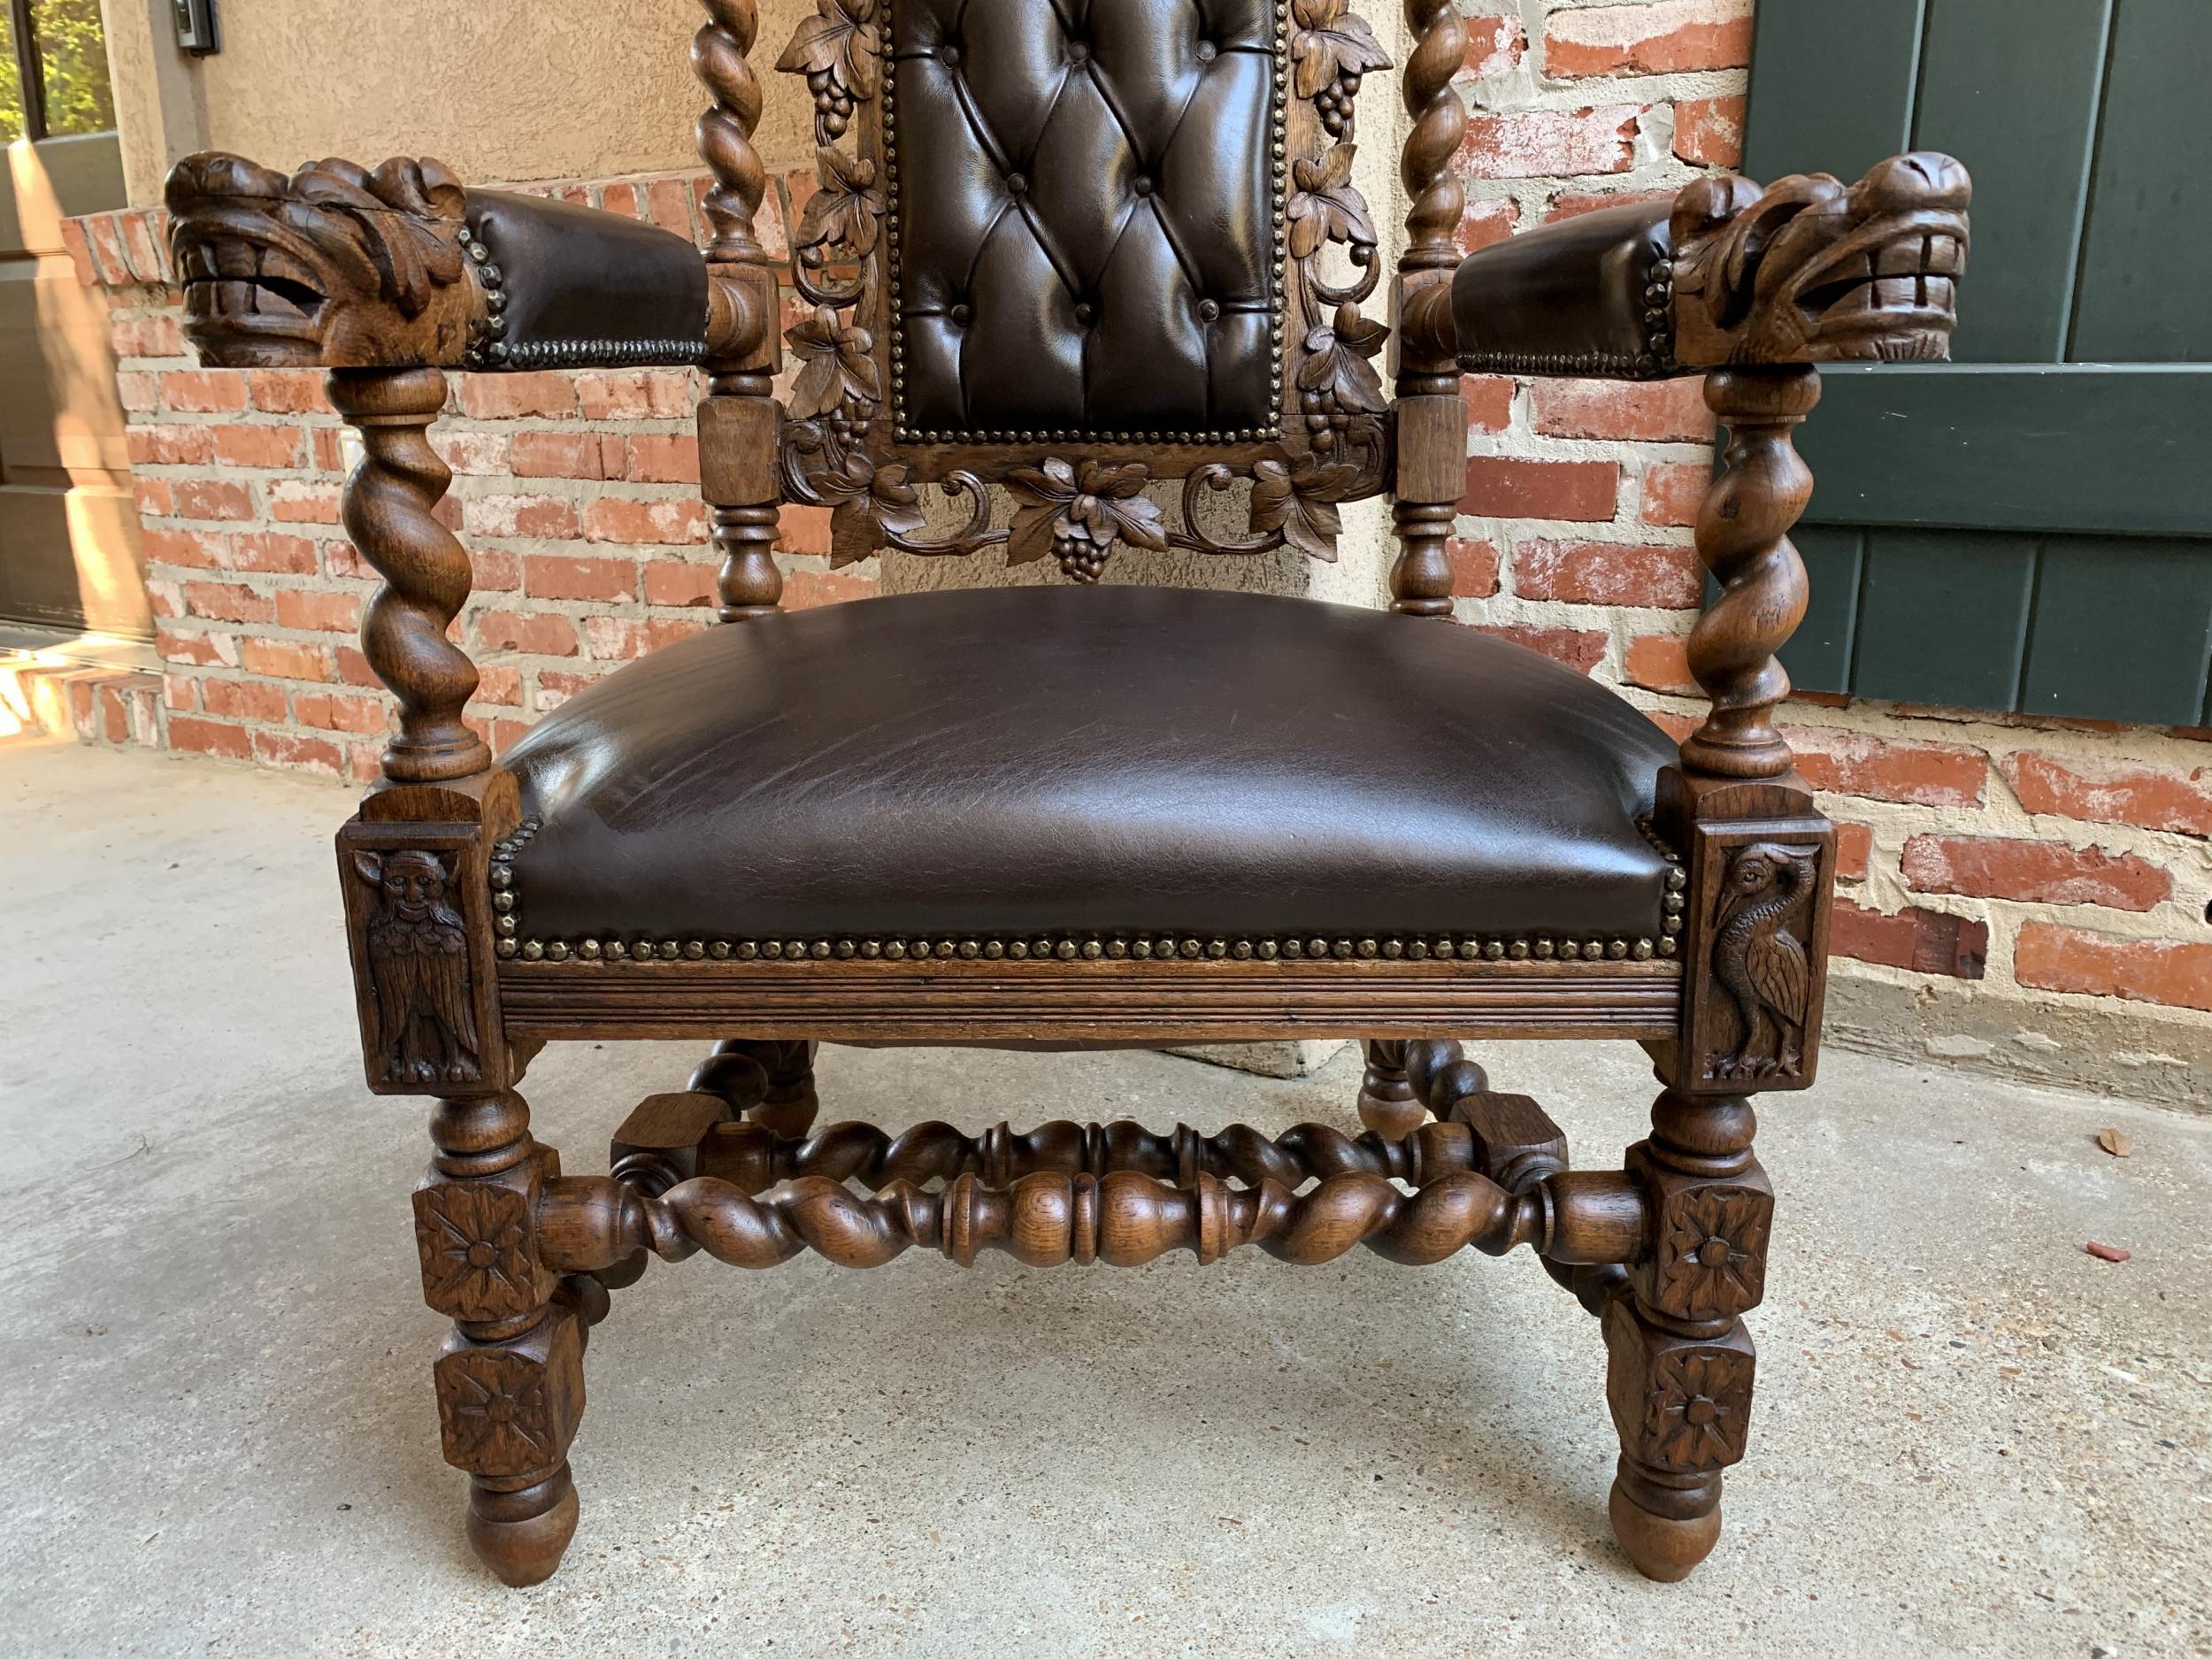 Hand-Carved Antique French Carved Oak Throne Armchair Barley Twist Renaissance Louis XIV